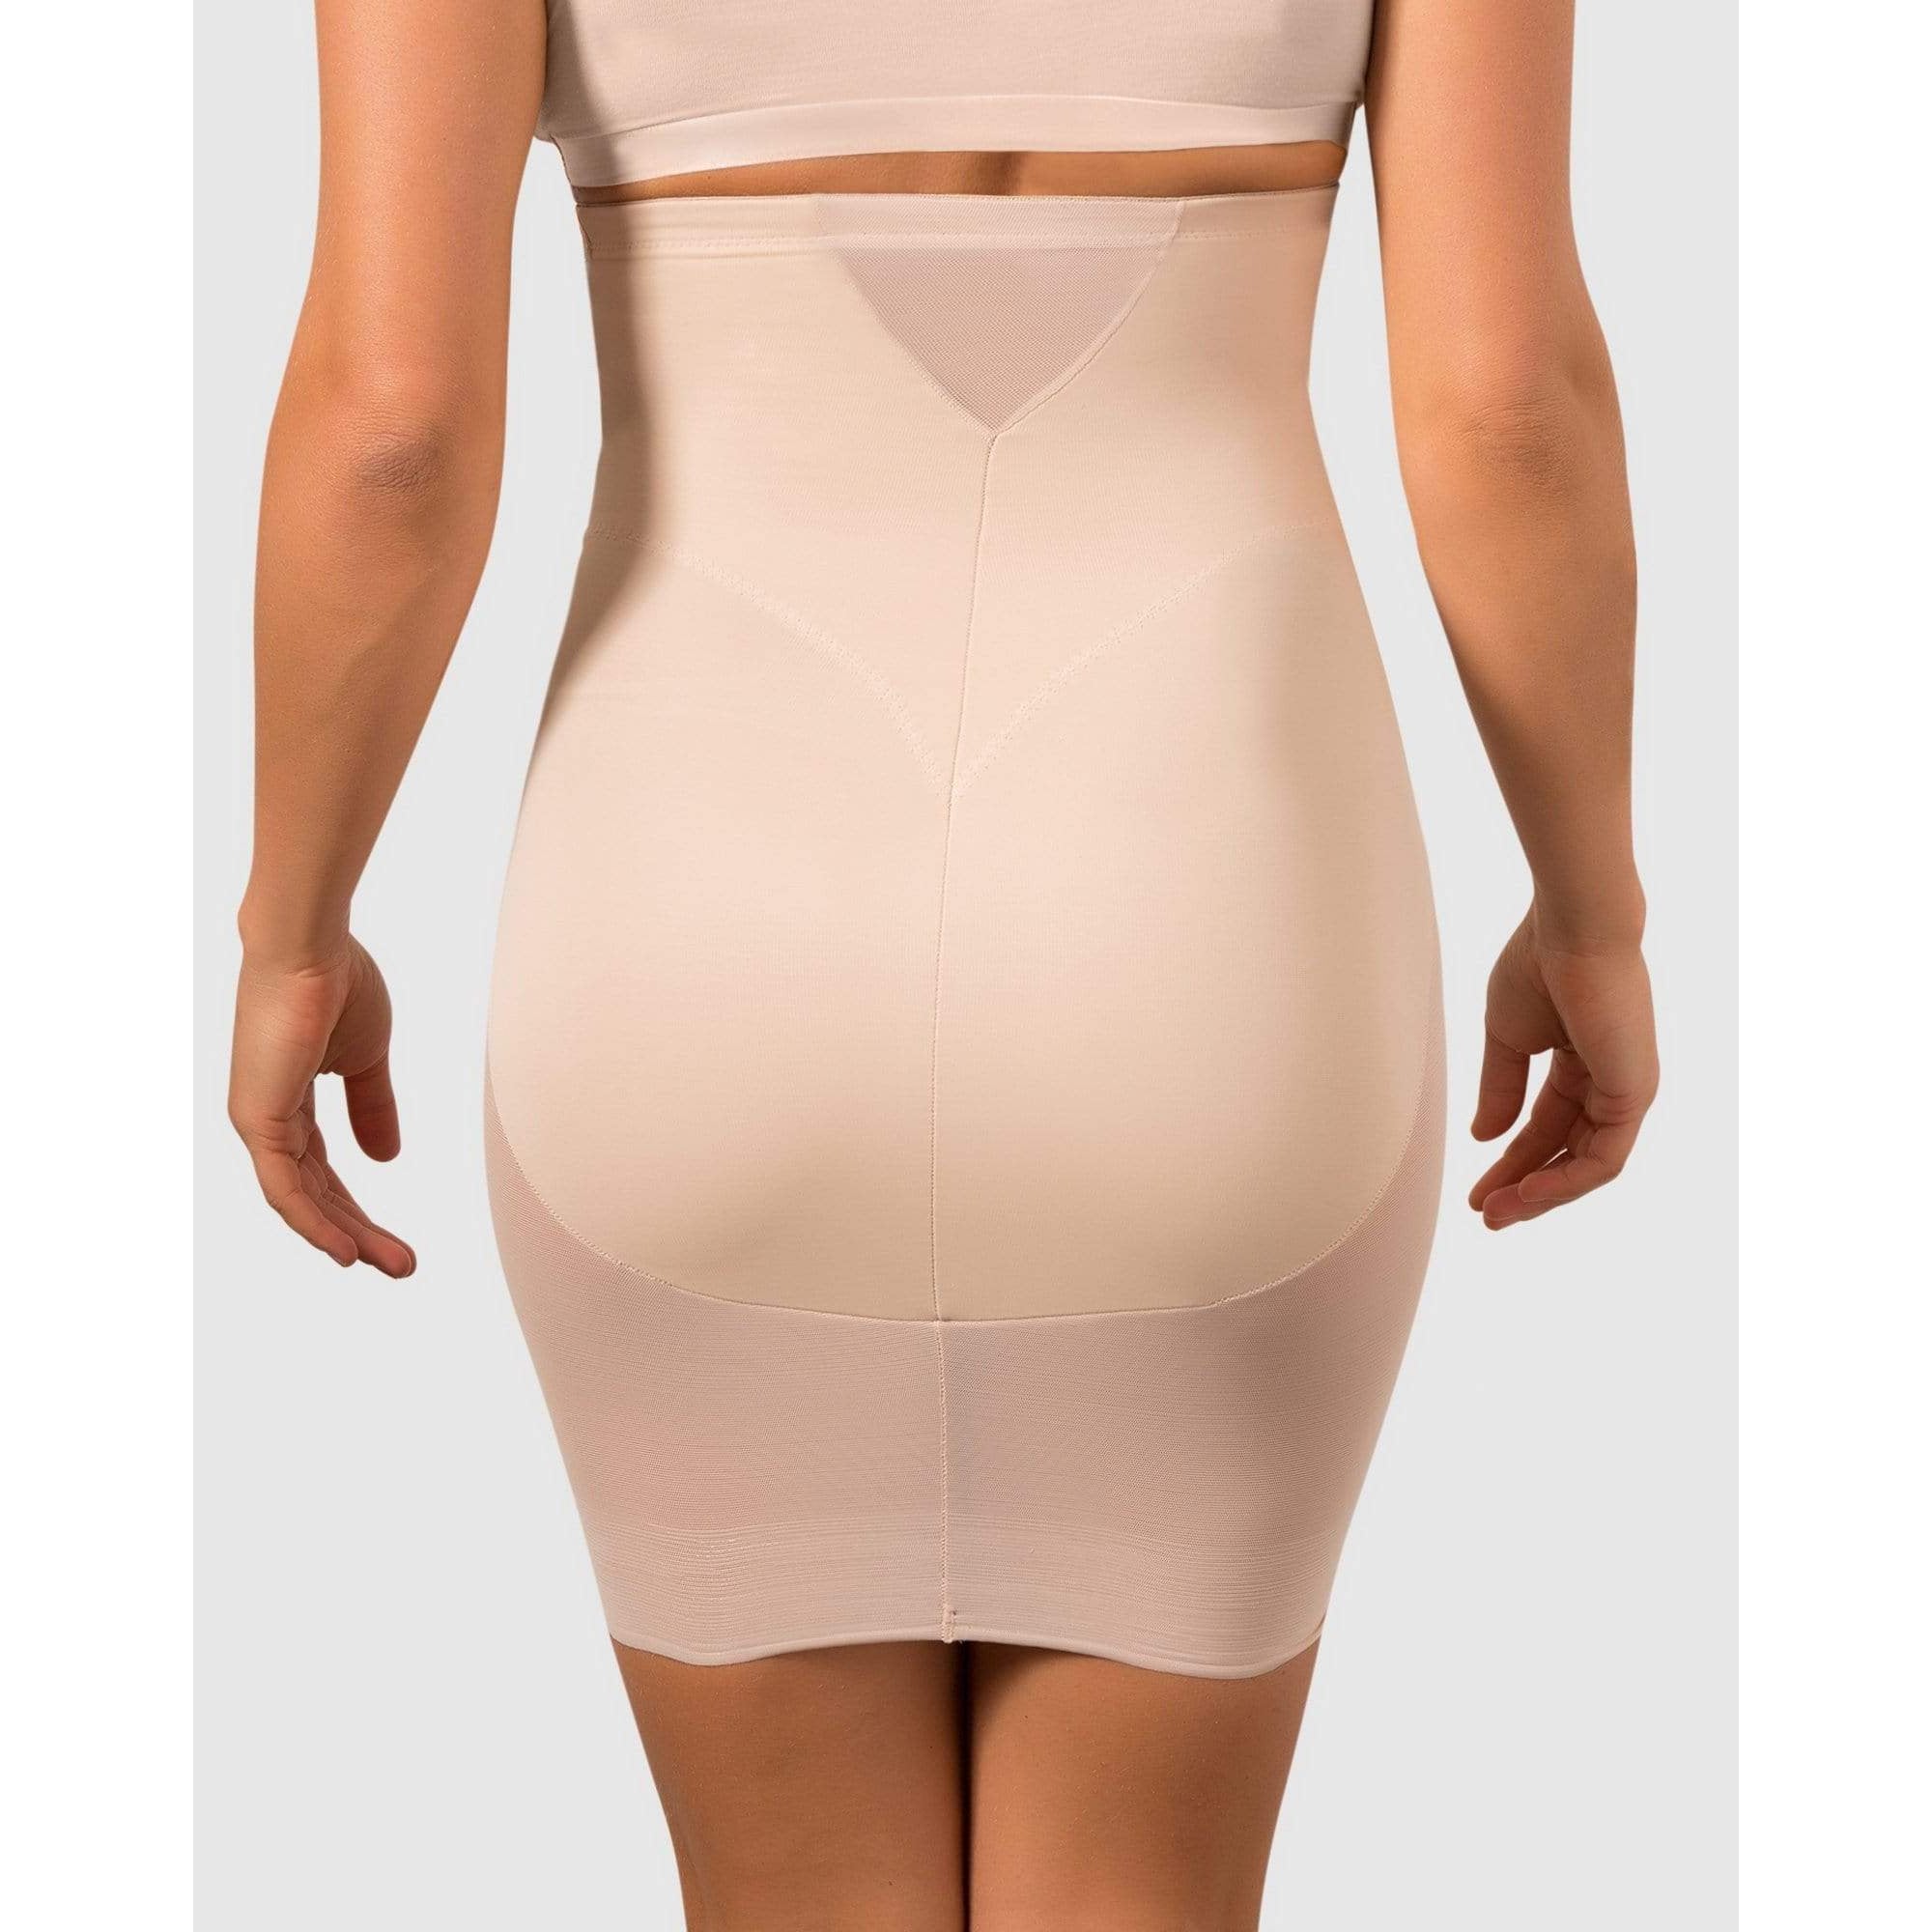 Miraclesuit Shapewear Sheer Half Slip from Illusions Lingerie in Melbourne